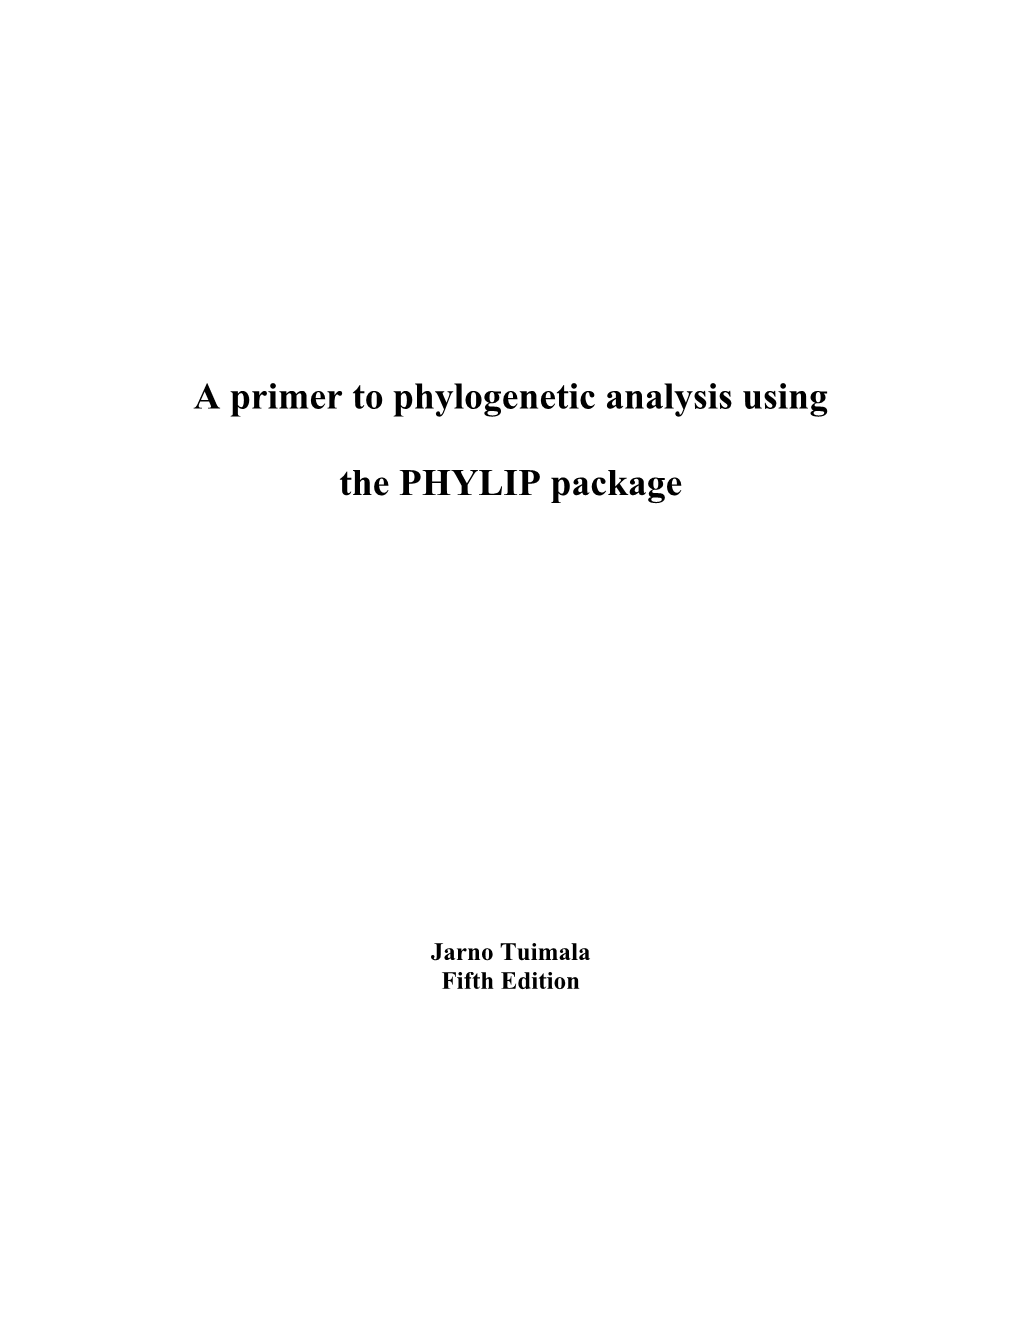 A Primer to Phylogenetic Analysis Using the PHYLIP Package